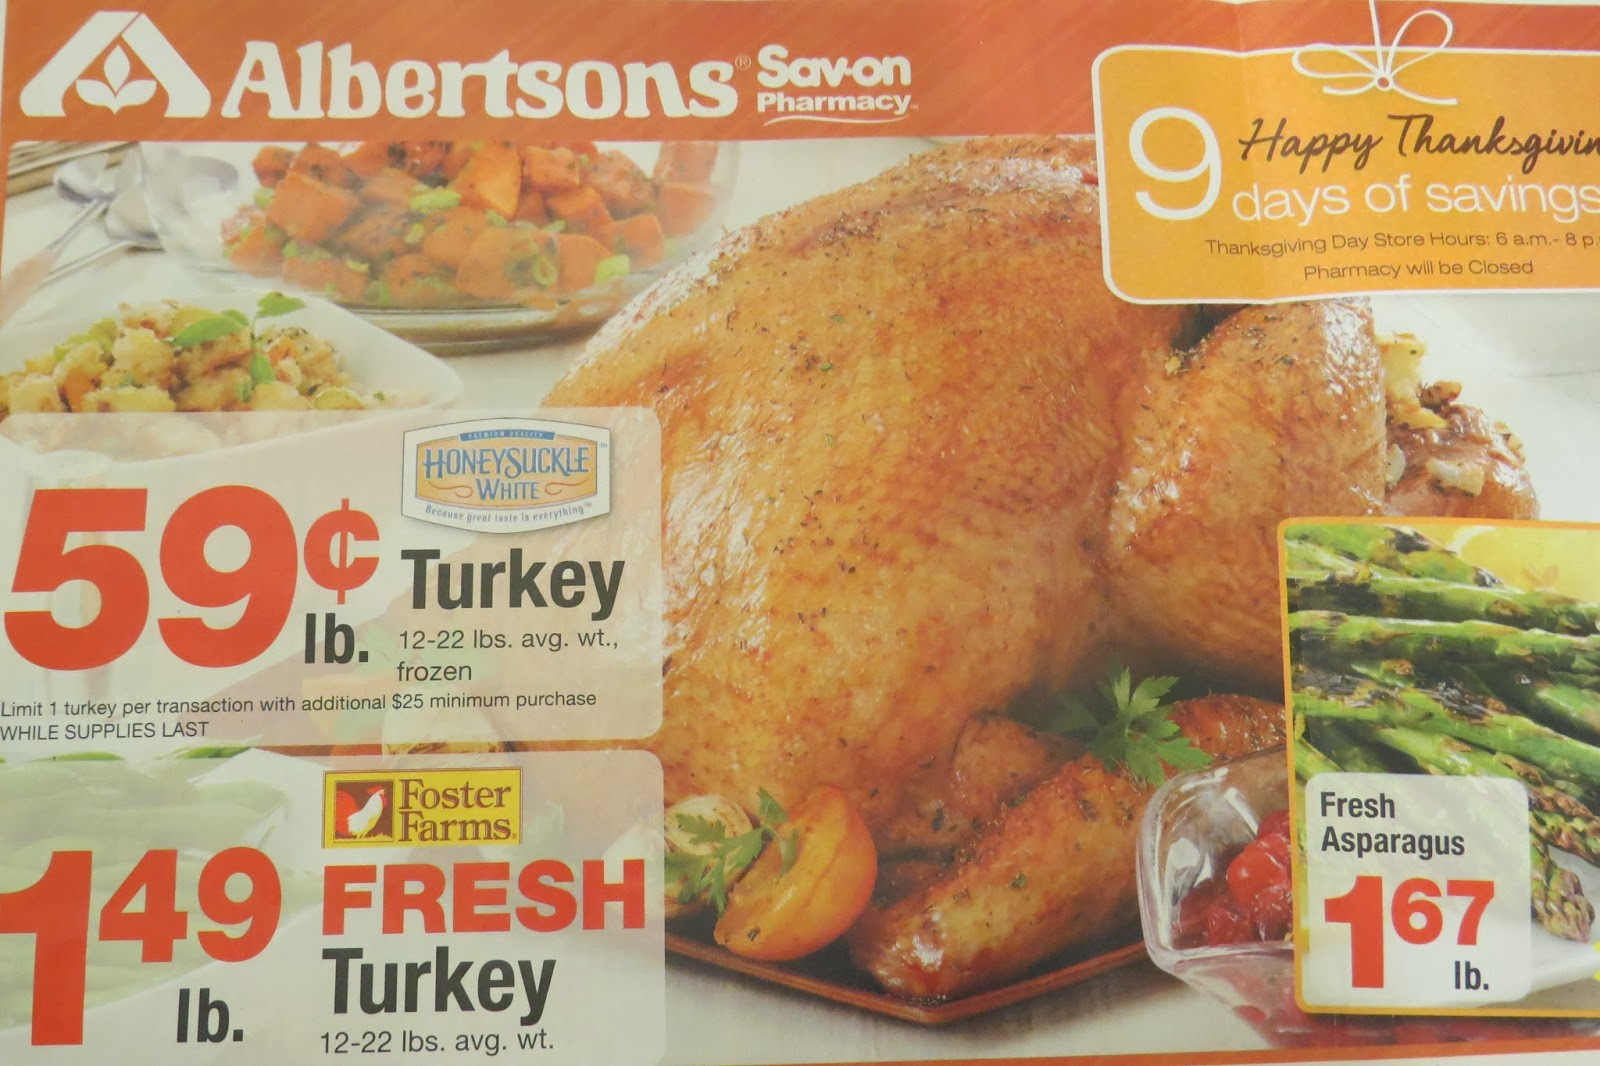 Albertsons Thanksgiving Dinner
 A Great Amazon Gift Card Deal at Albertsons